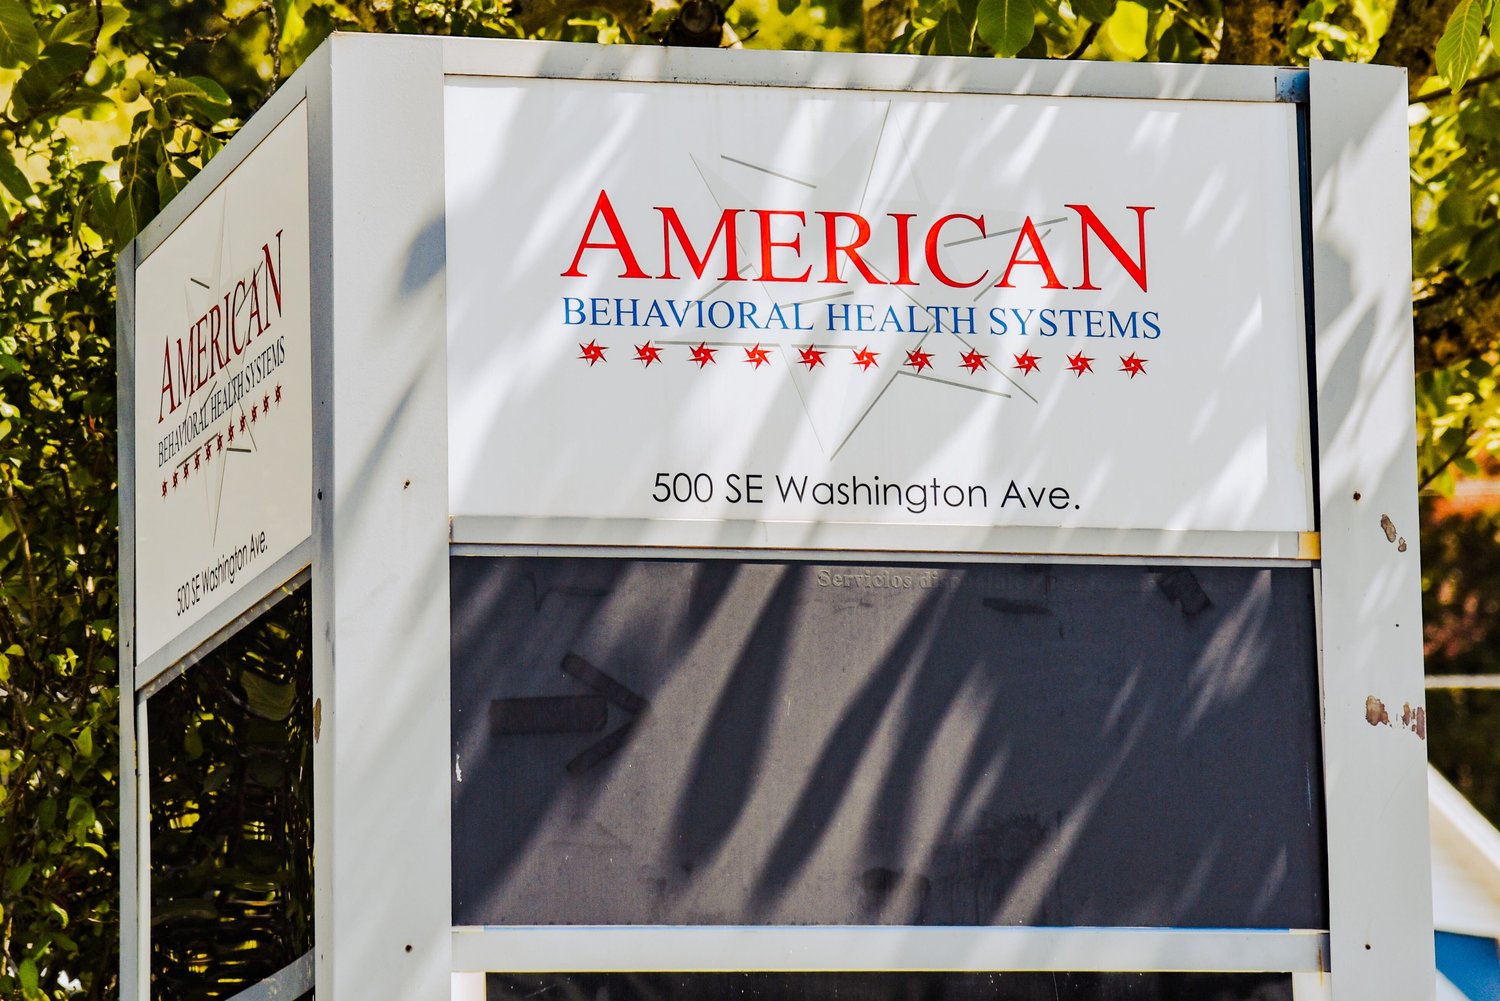 Signage for American Behavioral Health Systems is displayed at 500 SE Washington Ave. in Chehalis.